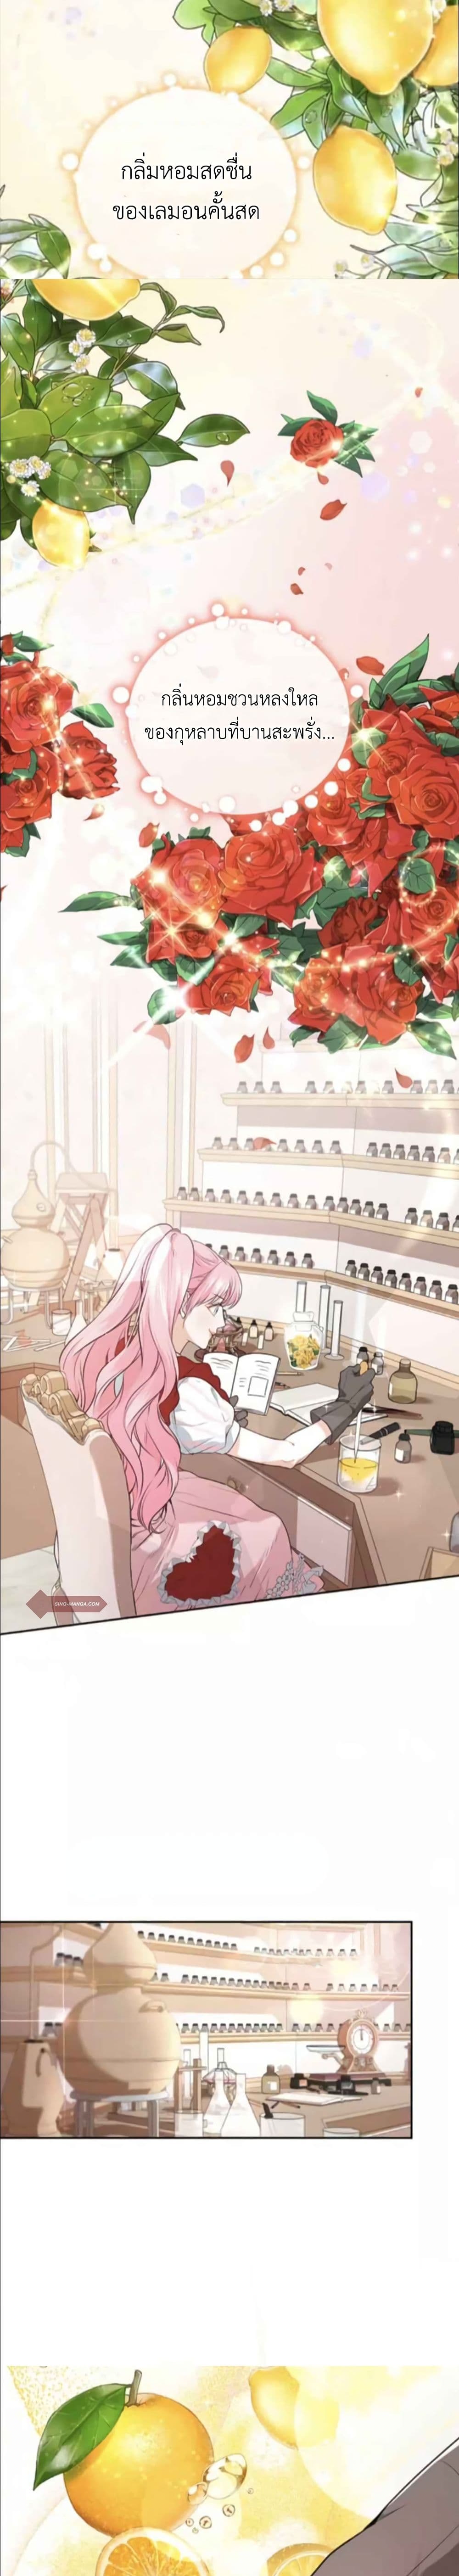 The Tyrant’s Only Perfumer 4 (10)